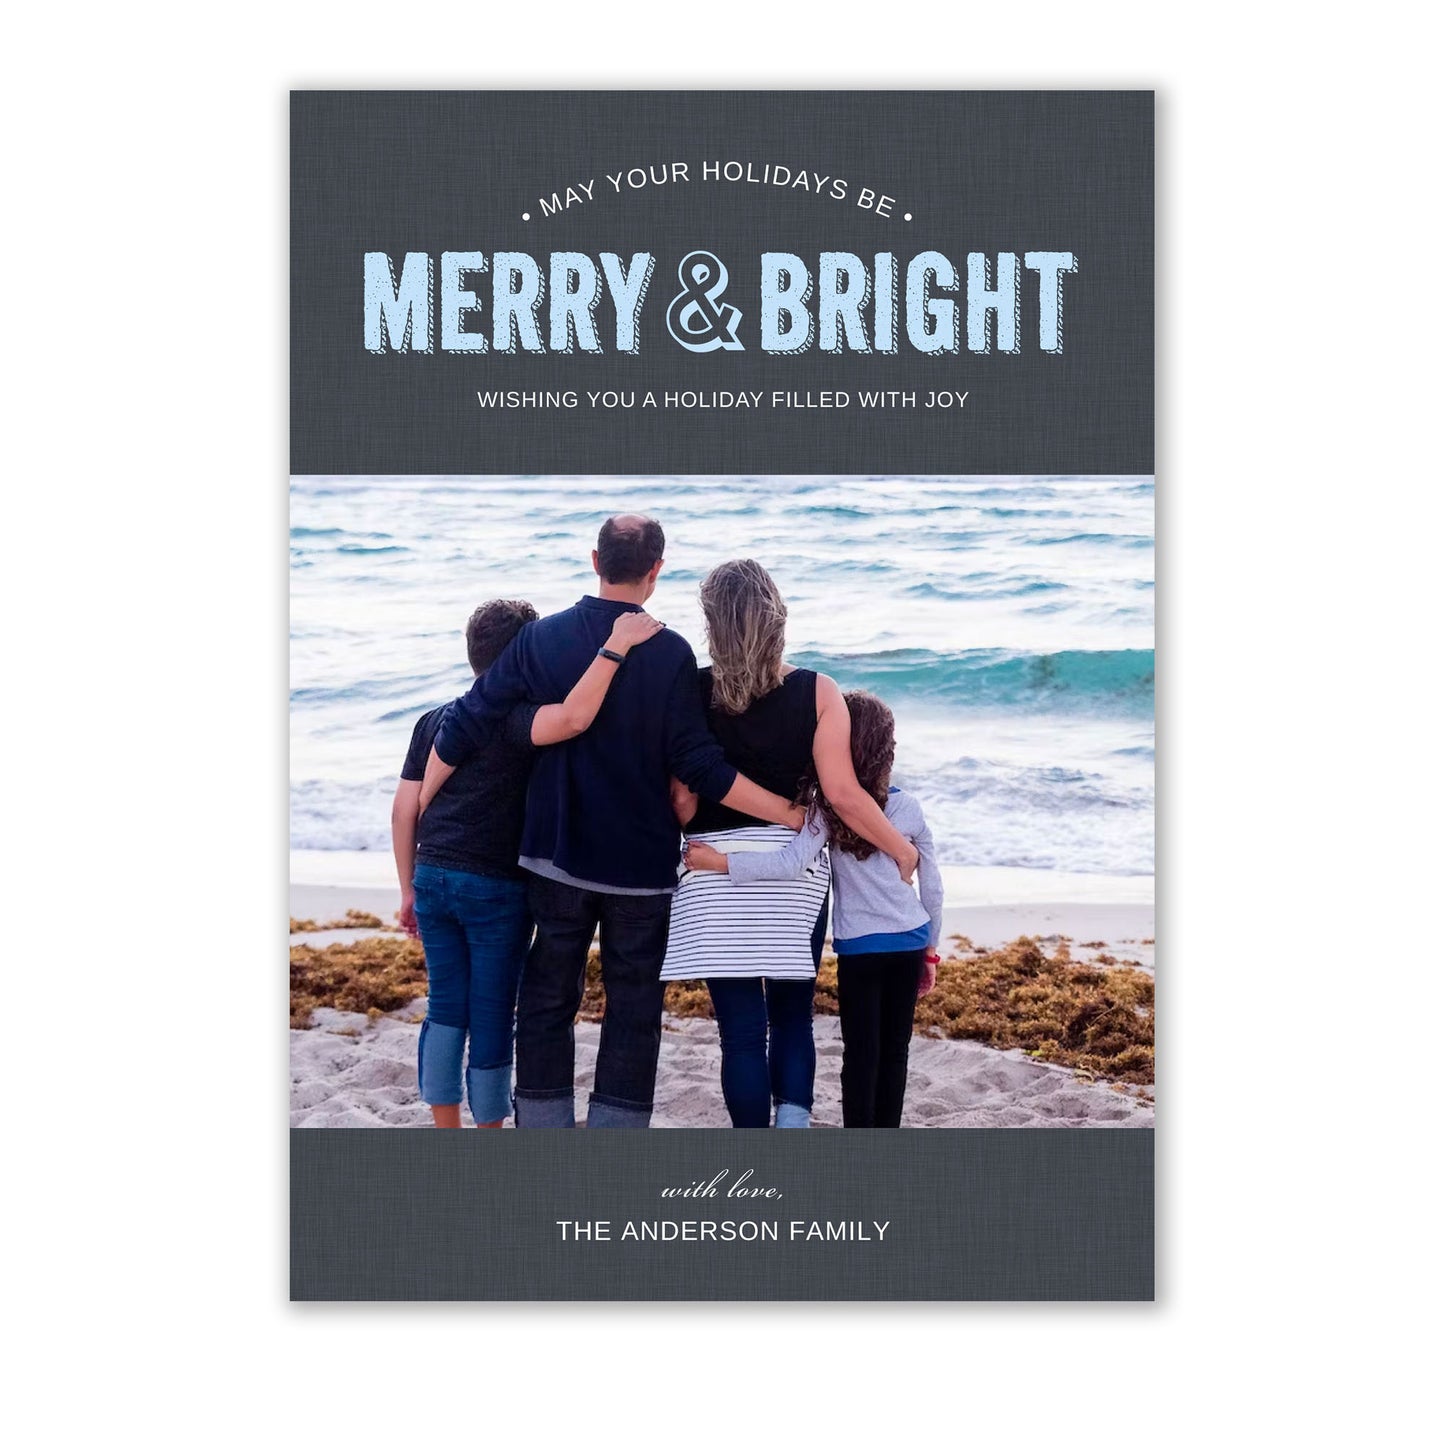 Merry & Bright Holiday Photo Cards